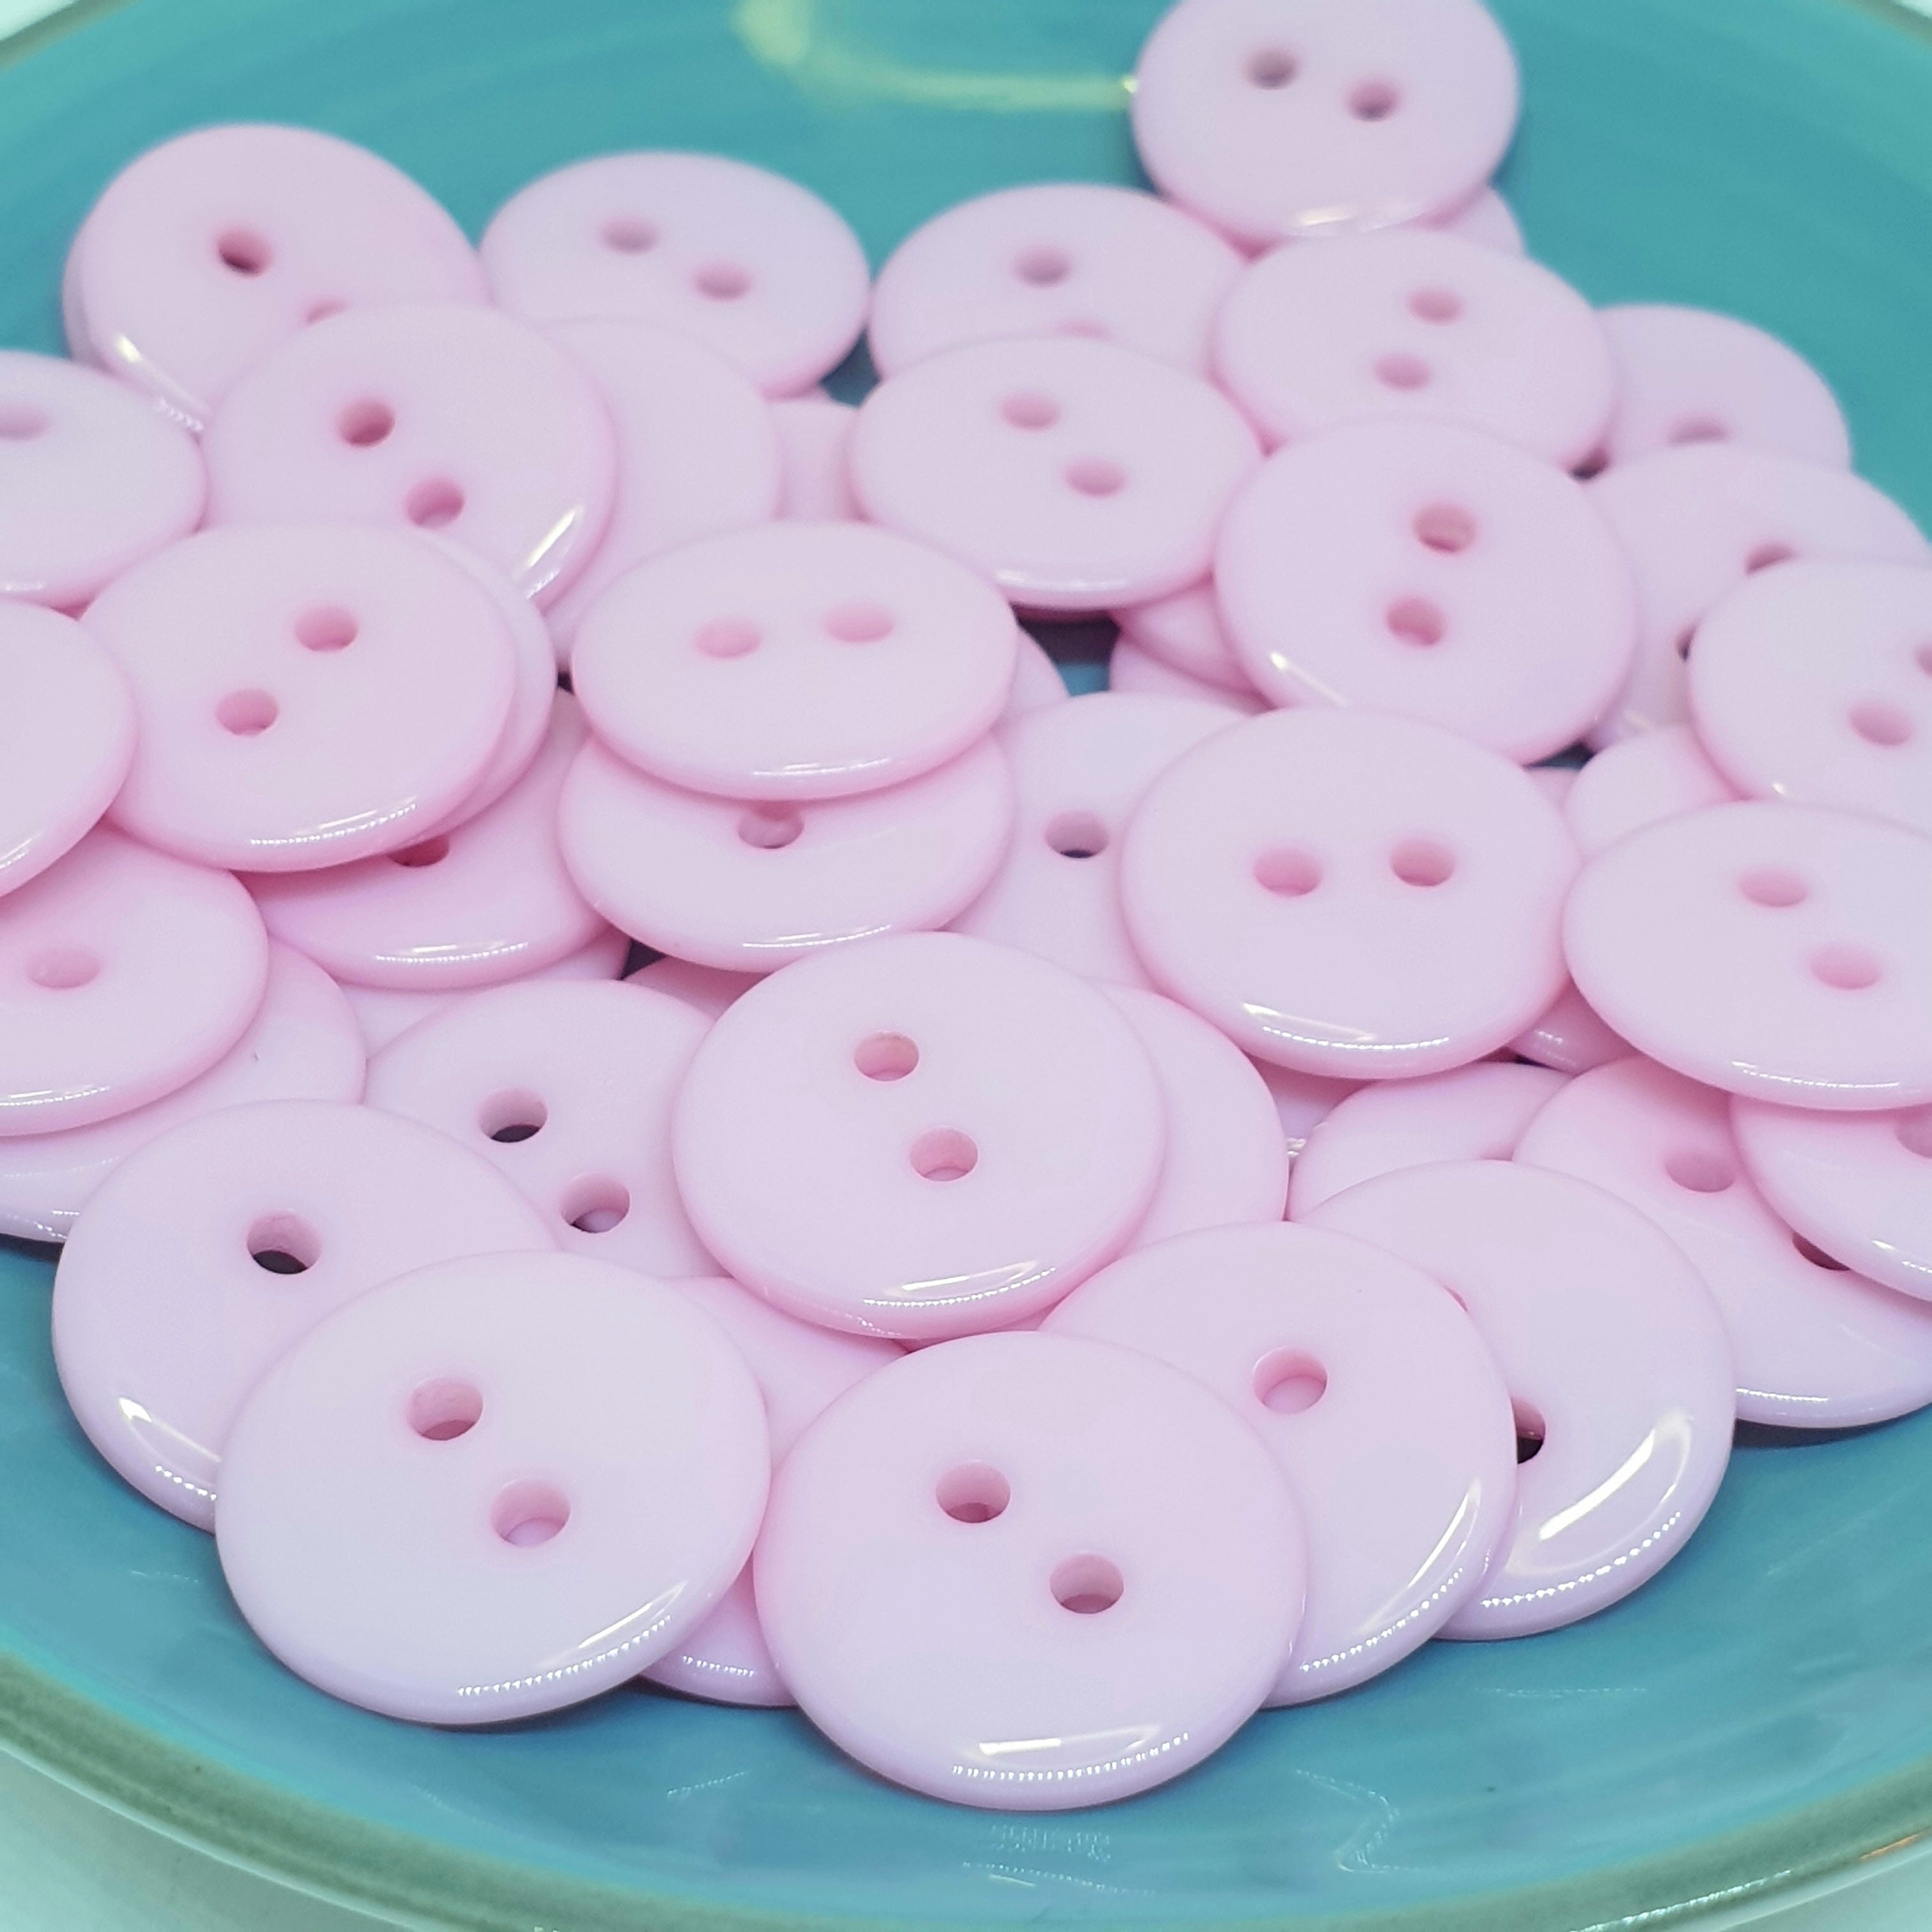 MajorCrafts 72pcs 15mm Light Pink 2 Holes Round Resin Sewing Buttons